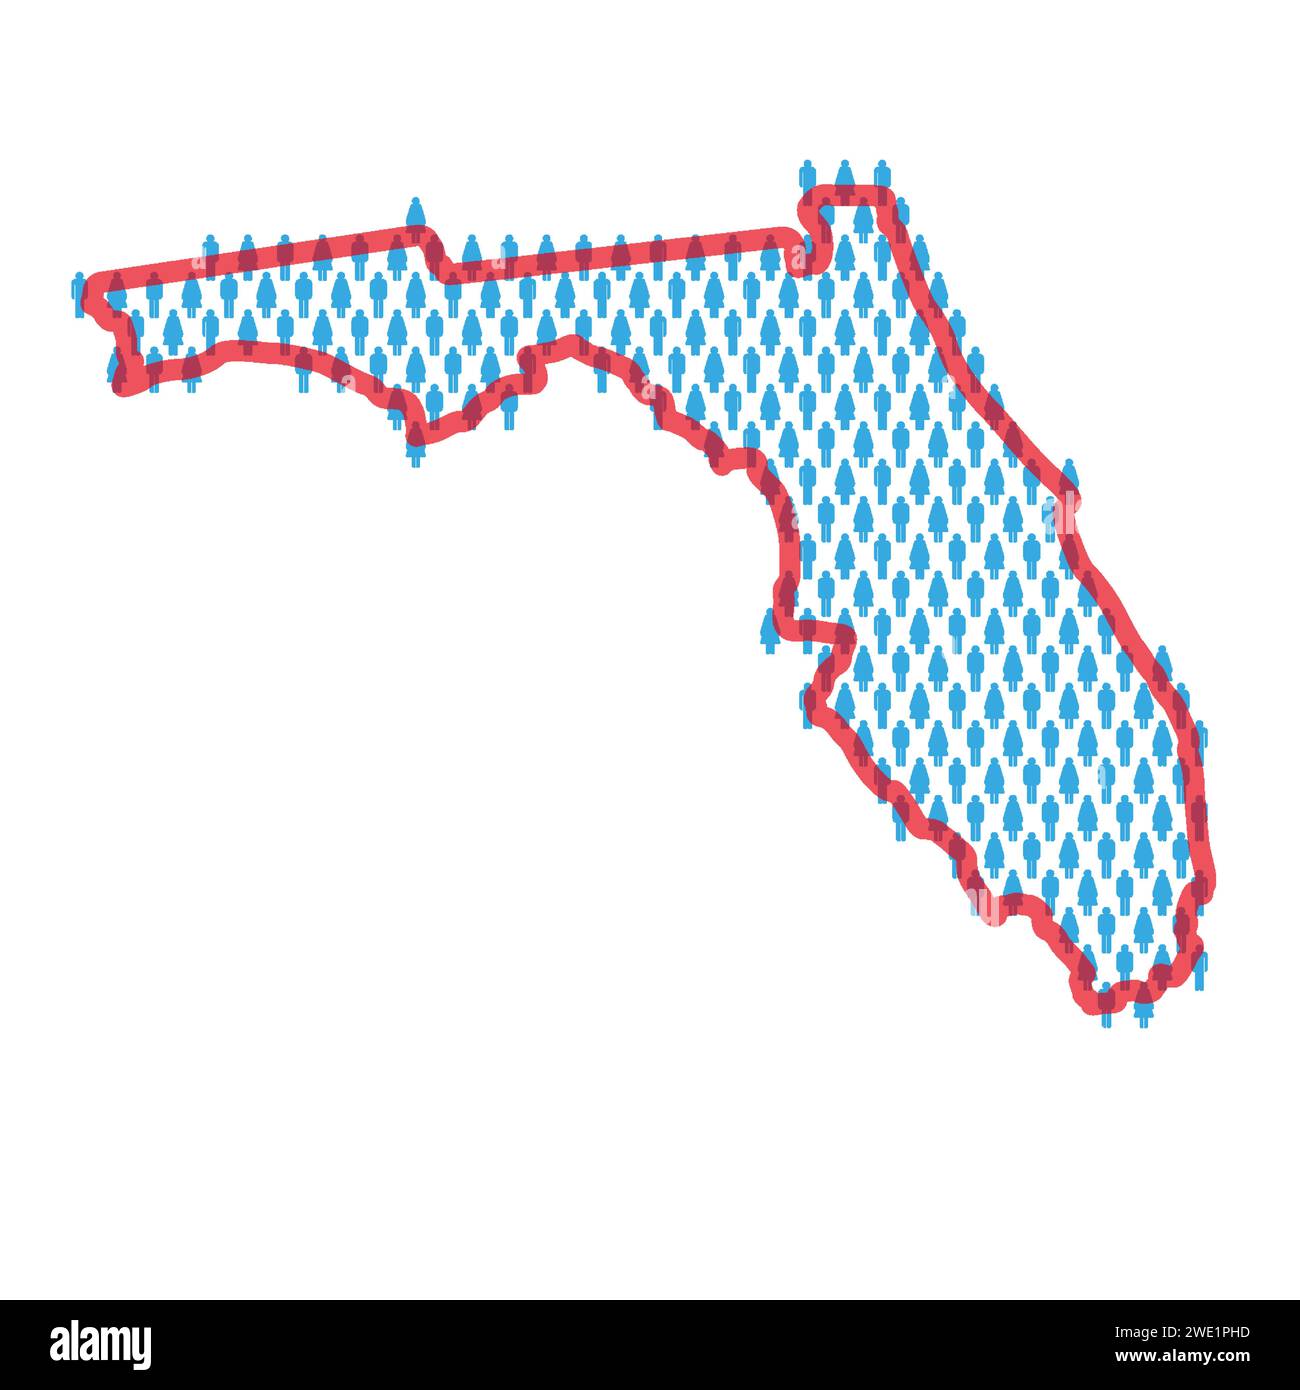 Florida population map. Stick figures people map with bold red translucent state border. Pattern of men and women icons. Isolated vector illustration. Stock Vector